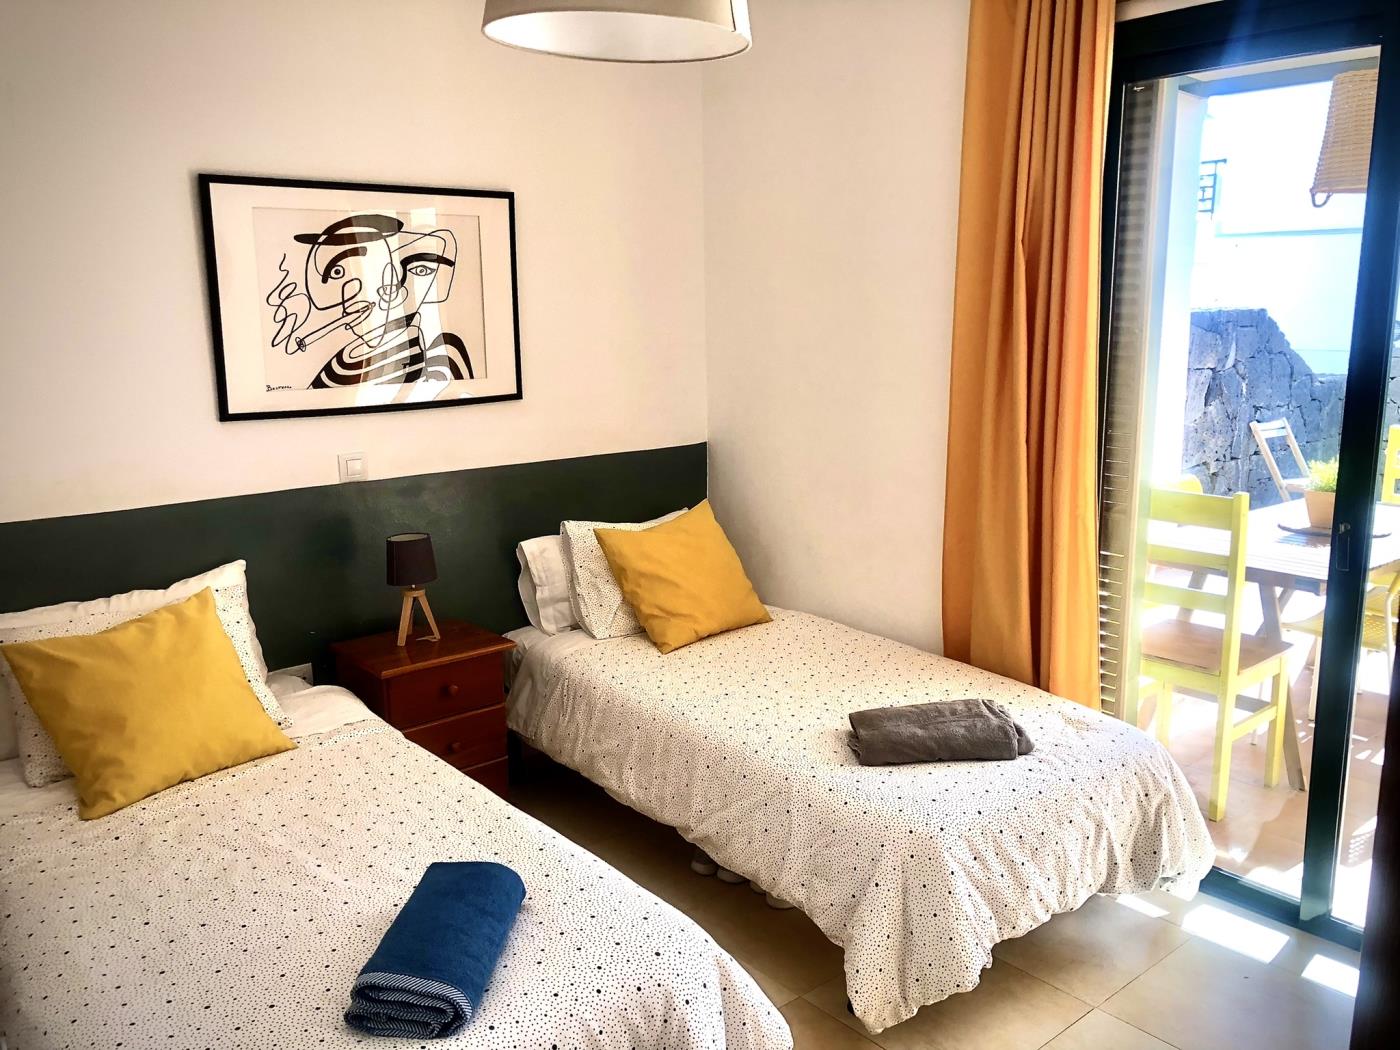 ALEGRANZA apartment with 3 rooms in Lanzarote in Teguise